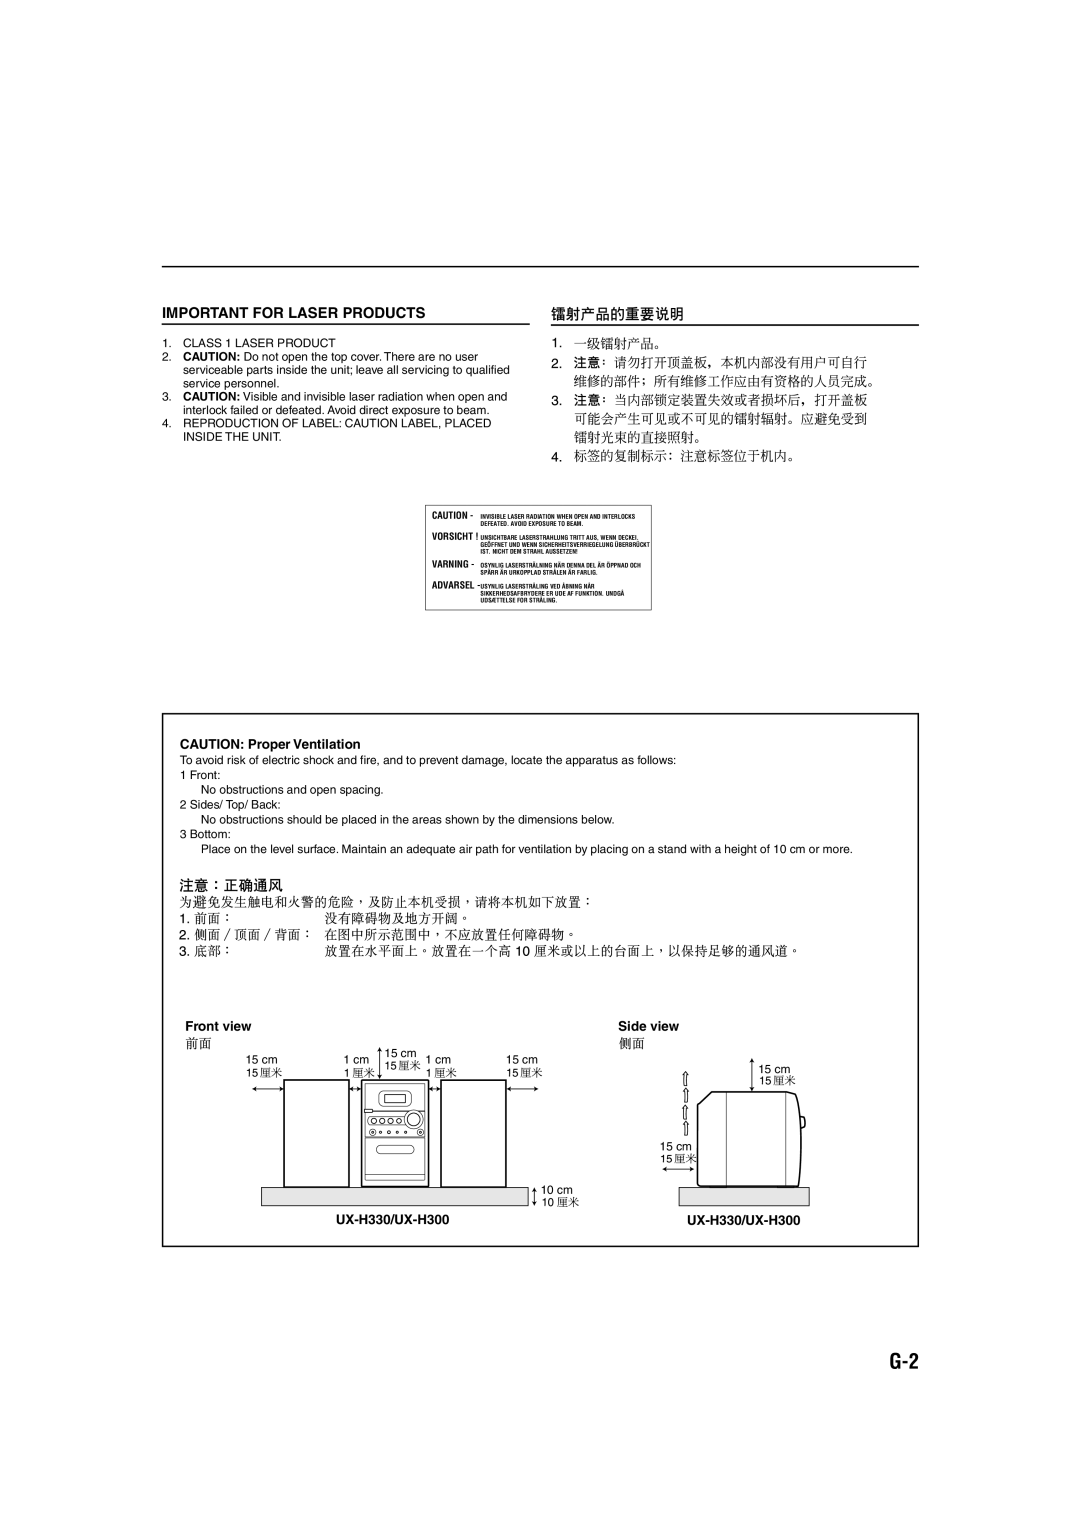 JVC manual Important For Laser Products, CAUTION: Proper Ventilation, Front view, Side view, UX-H330/UX-H300 